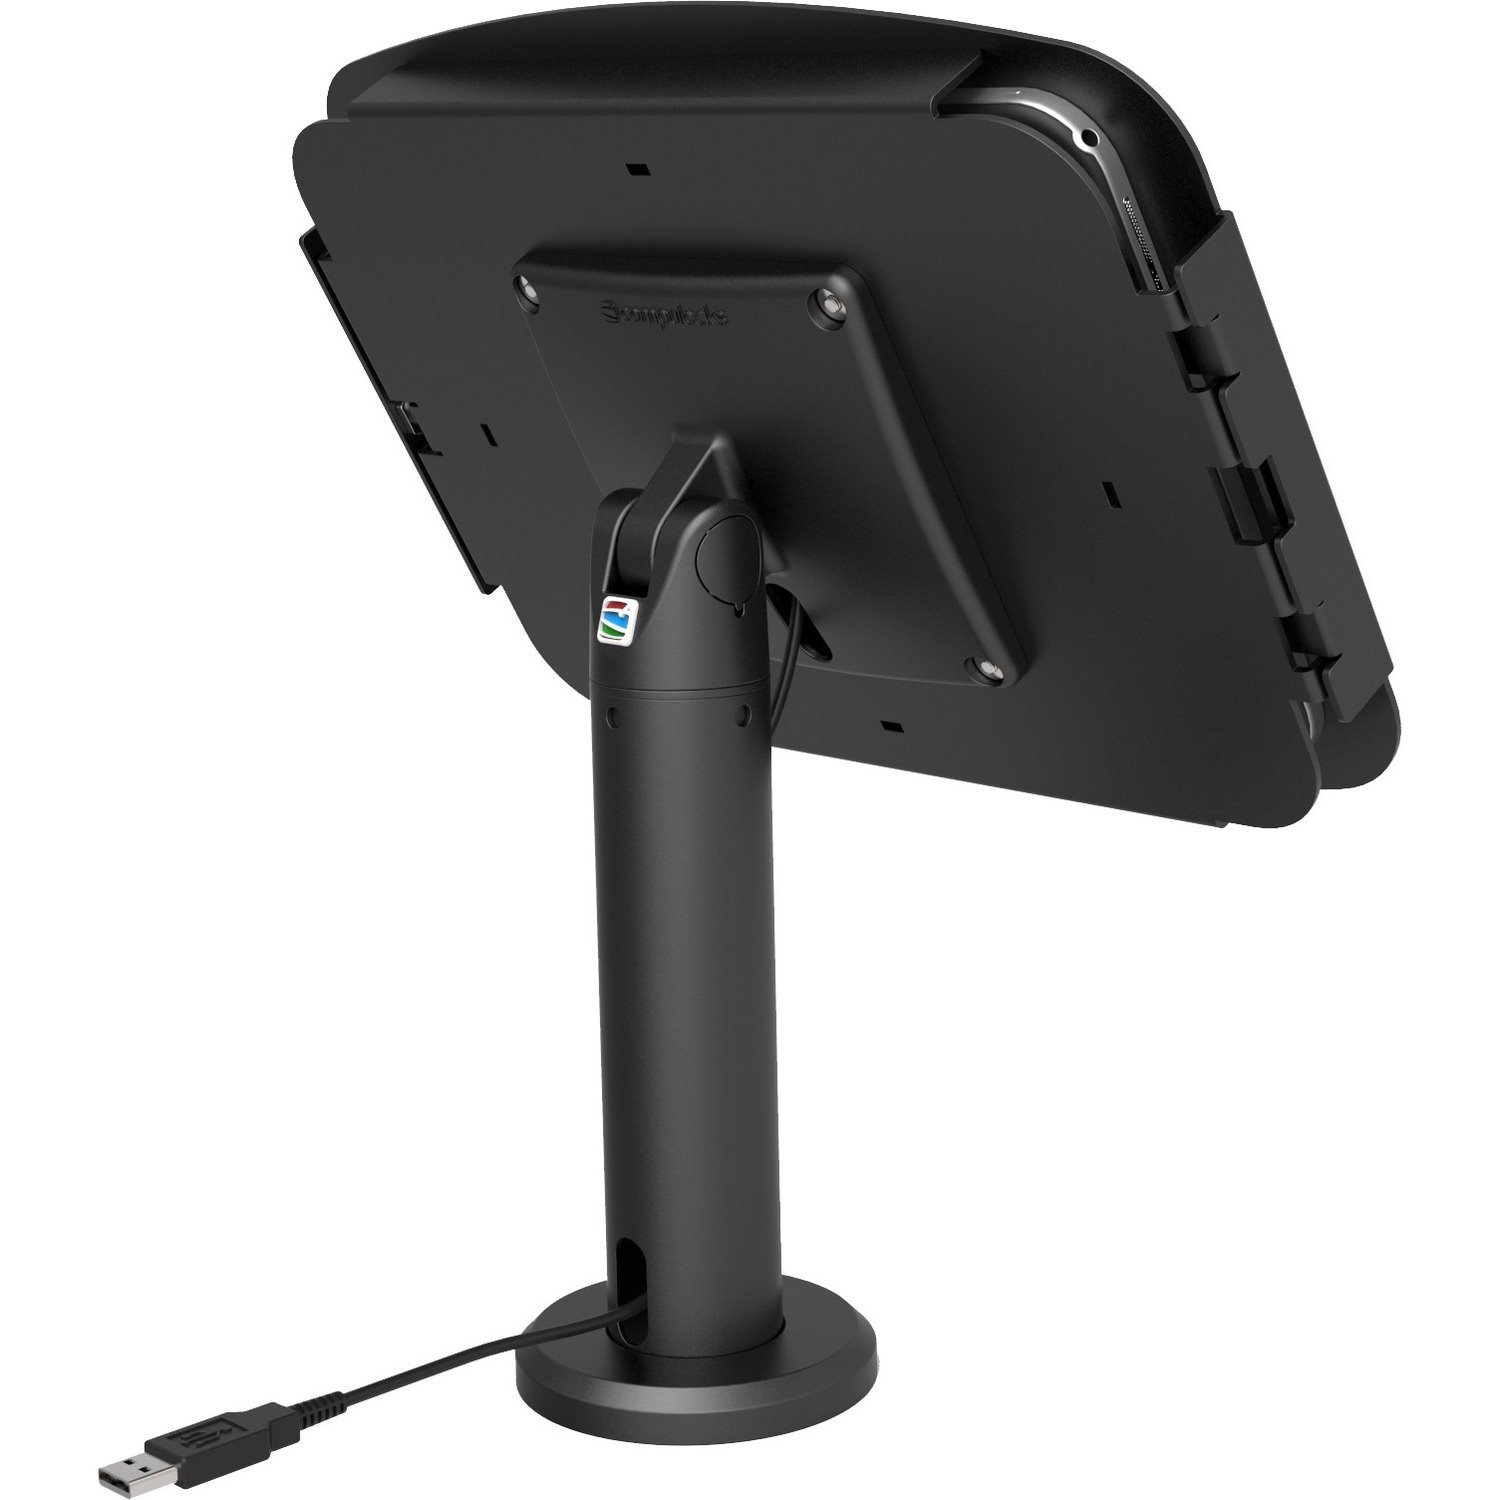 RISE for iPad 2/3/4/ AIR 1 & Air 2. The New Kiosk Stand with Vesa Mount Flip&Swivel with Cable Management - 40 cm height Black